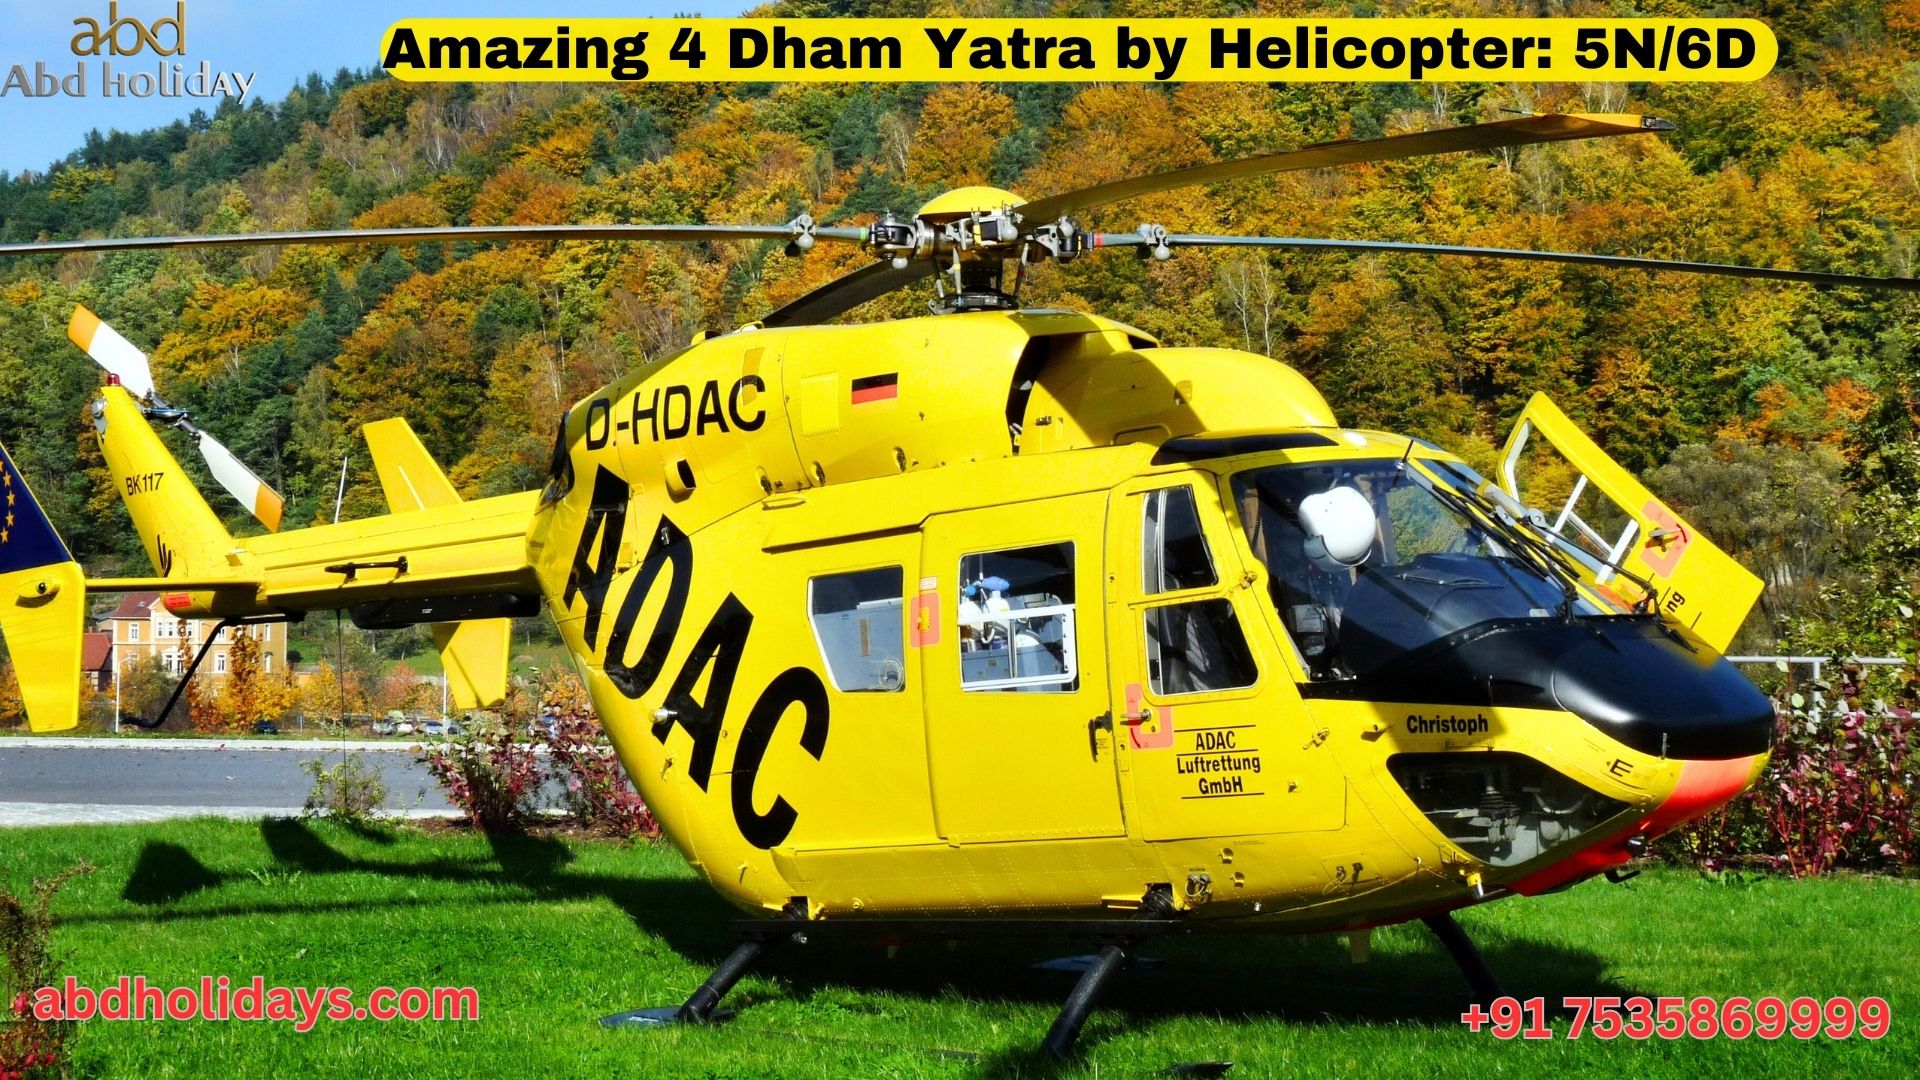 Amazing 4 Dham Yatra by Helicopter 5N/6D 